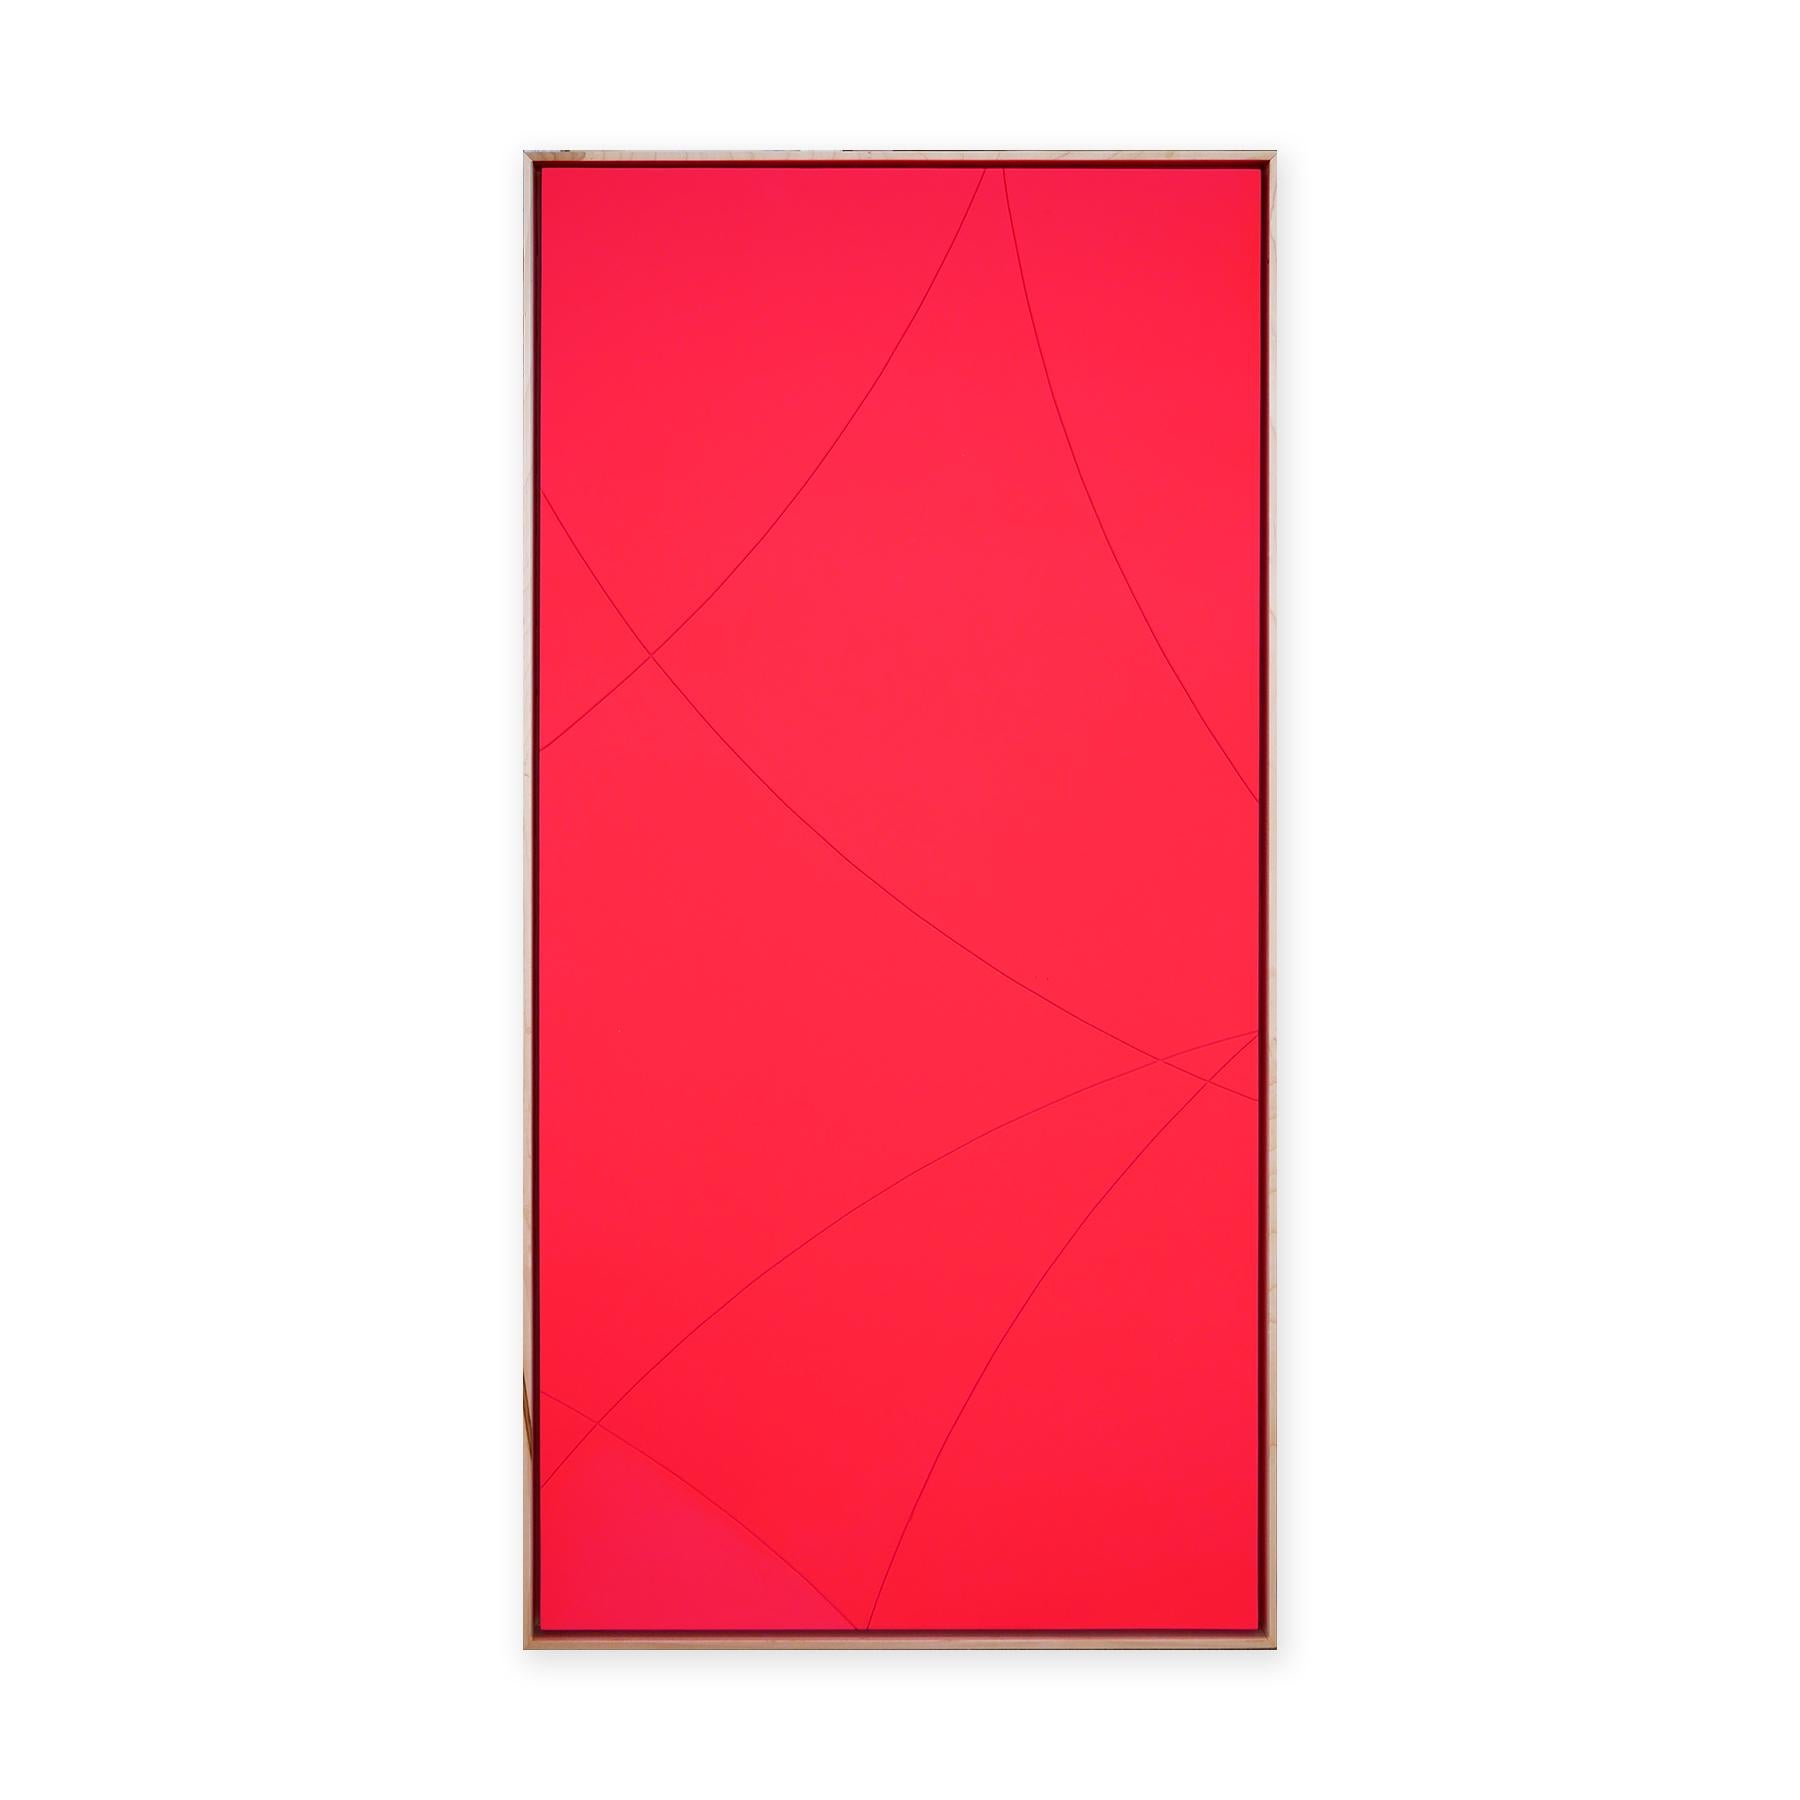 Abstract wall sculpture painting featuring curved intersecting linear grooves painted with neon pink paint. Displayed in a complementary natural light wood frame that sets off the brightness of the pink. Signed, titled, and dated by artist on